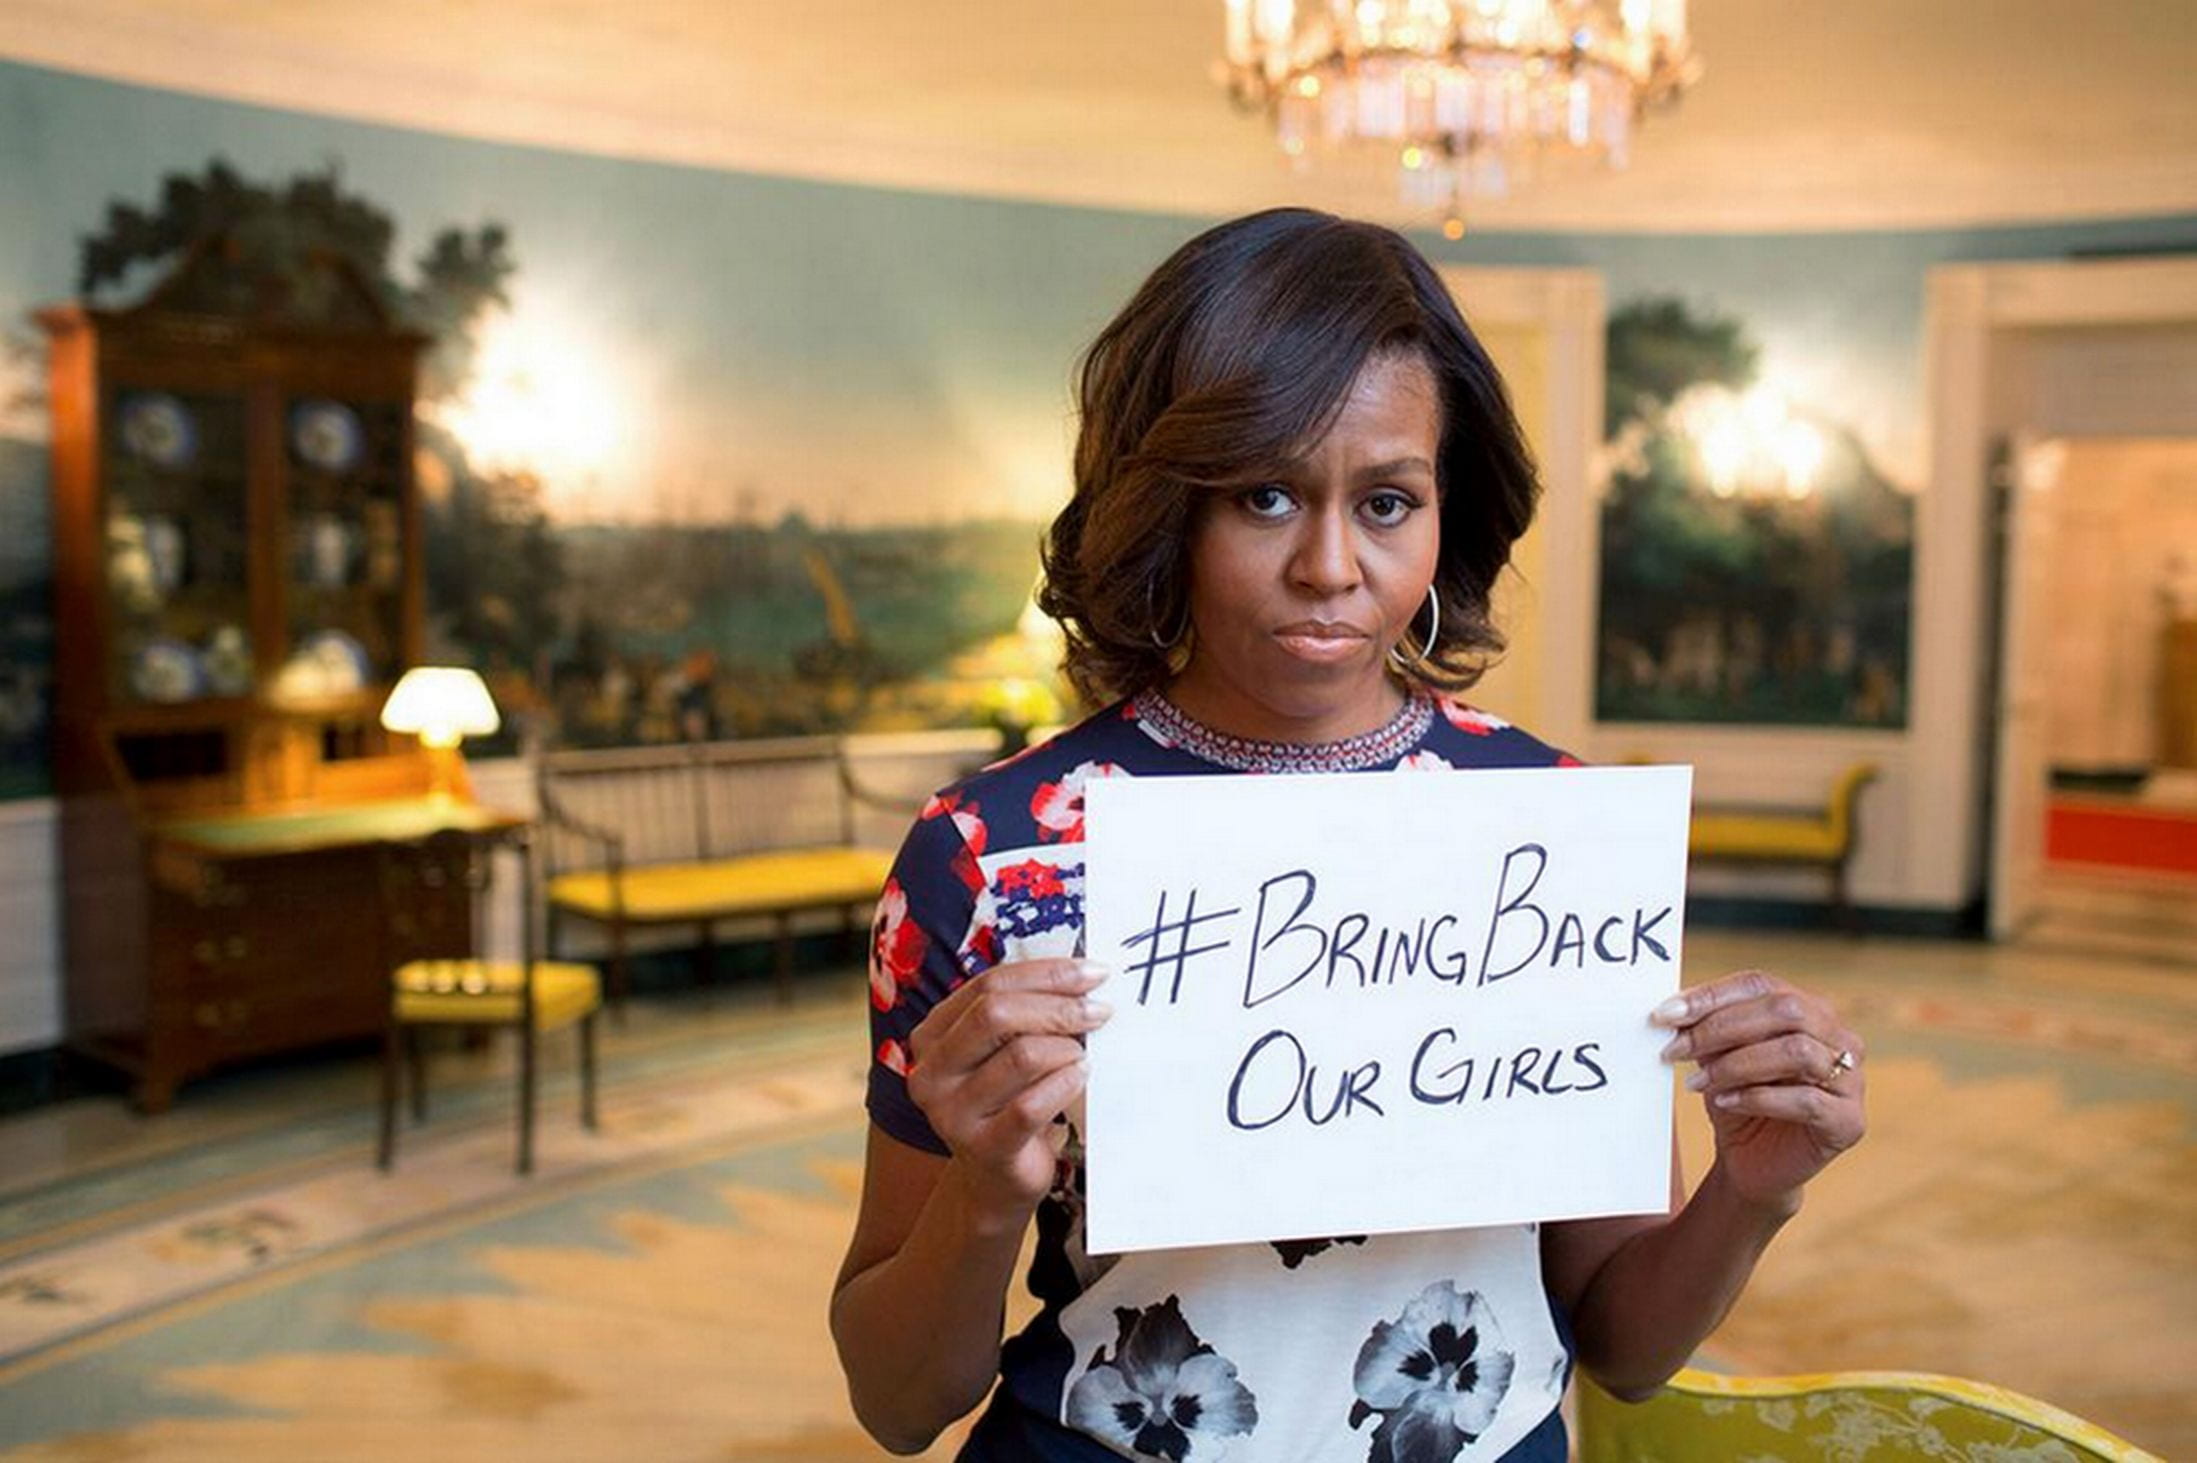 An image of former First Lady Michelle Obama holding up a sign saying #BringBackOurGirls.